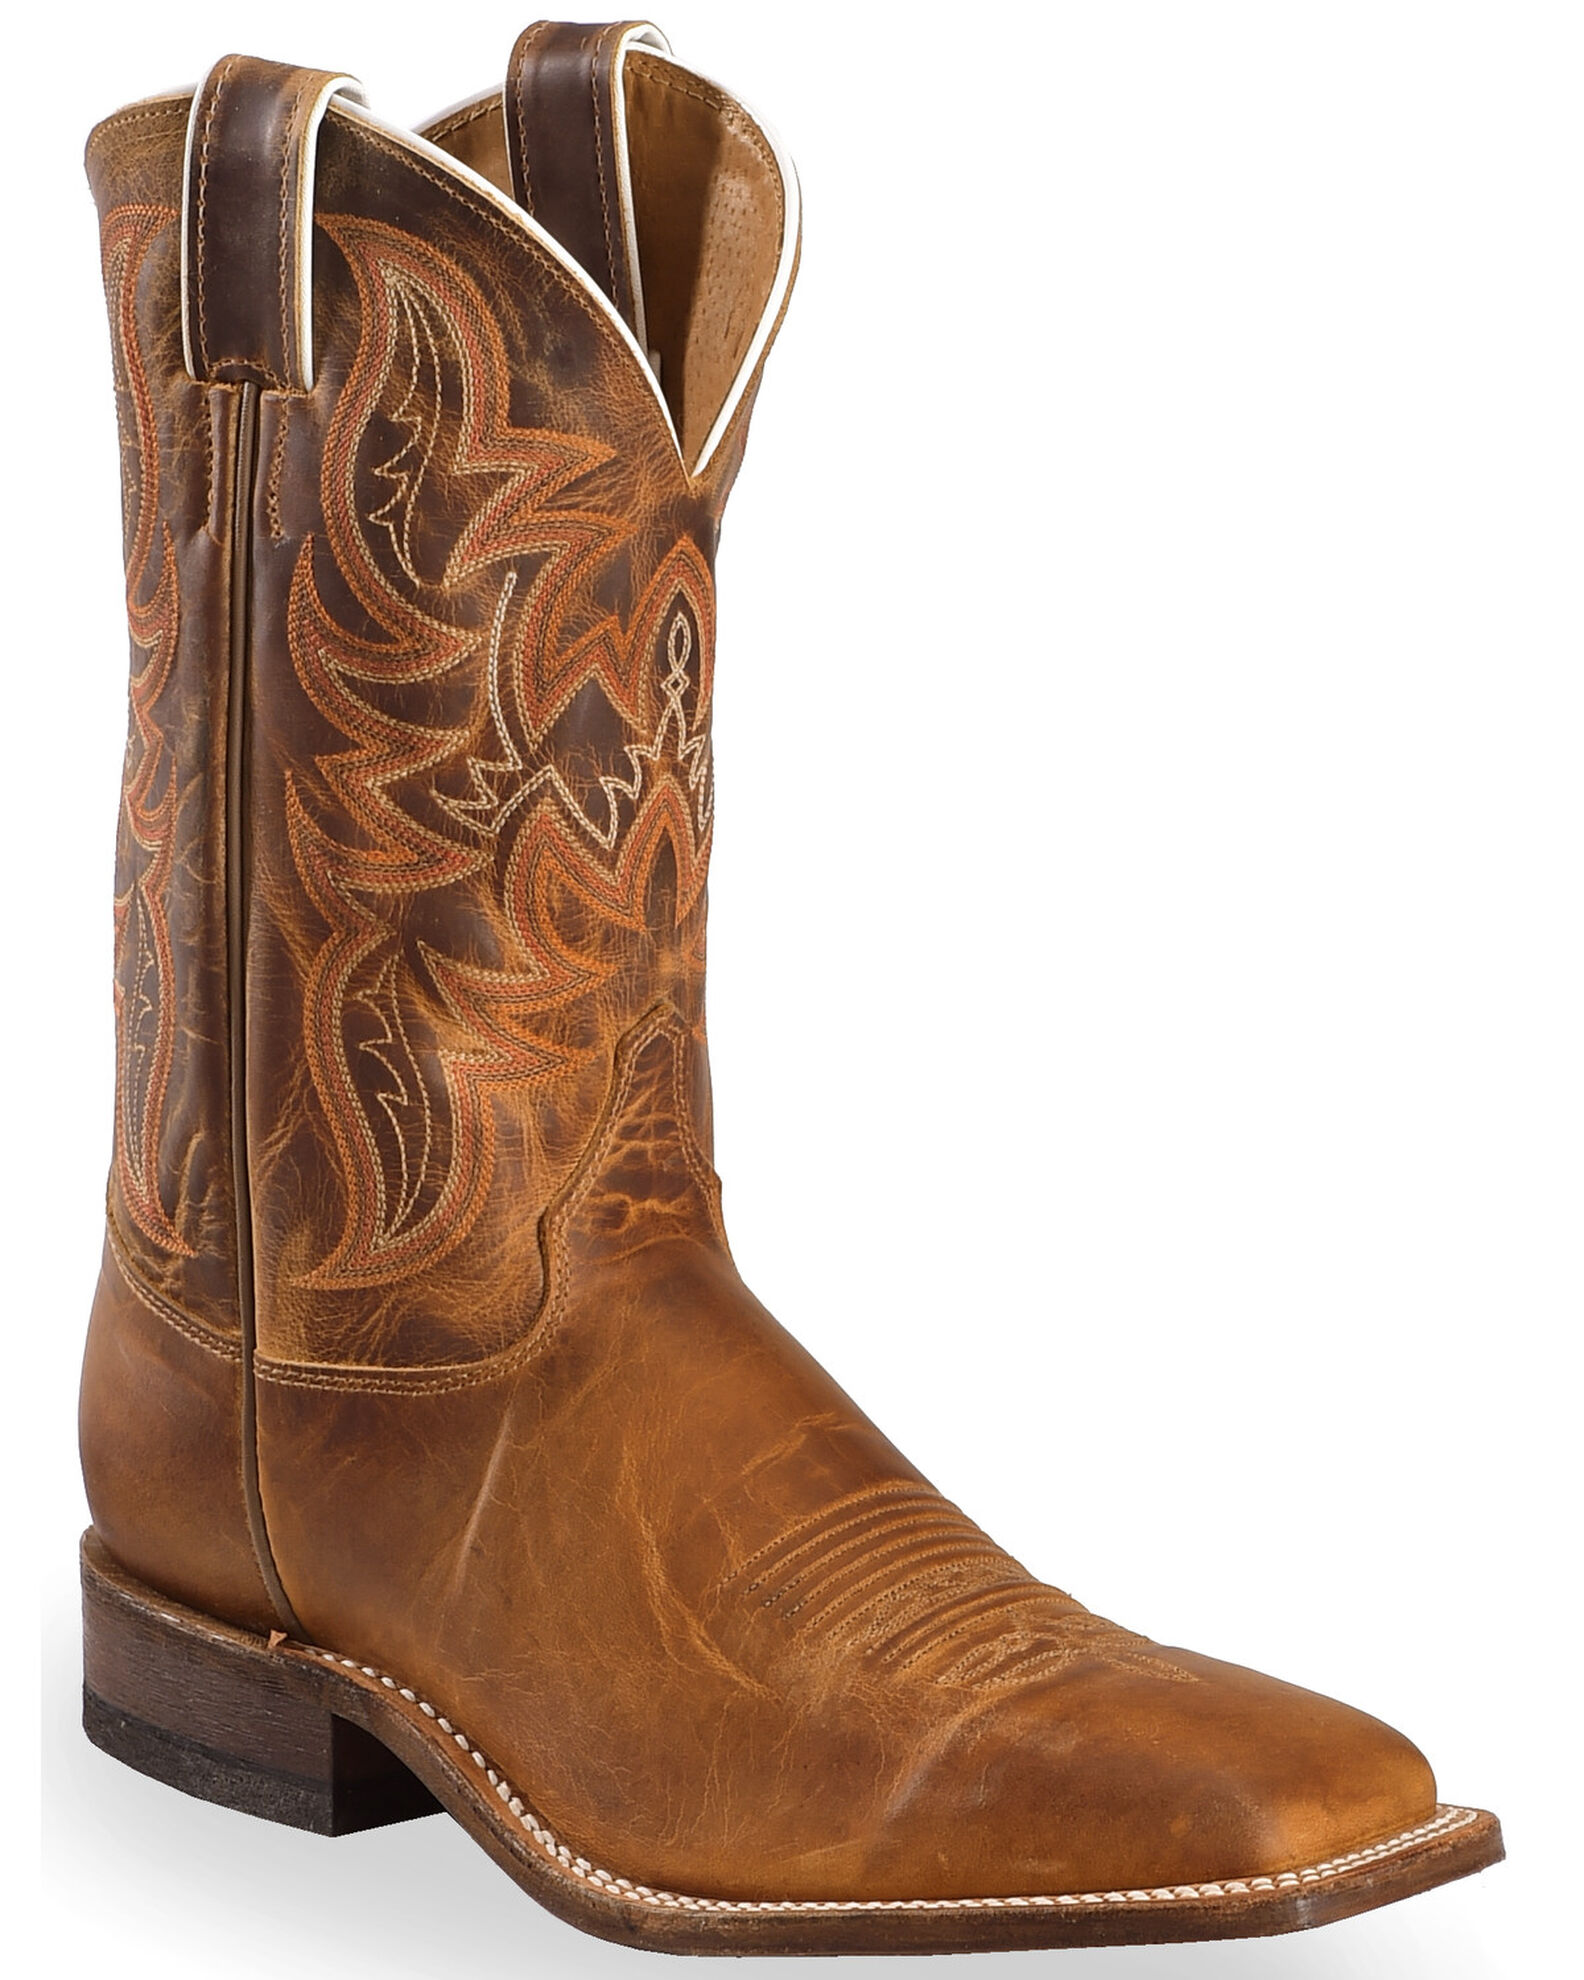 Where Can I Buy Justin Mens Western Boots?